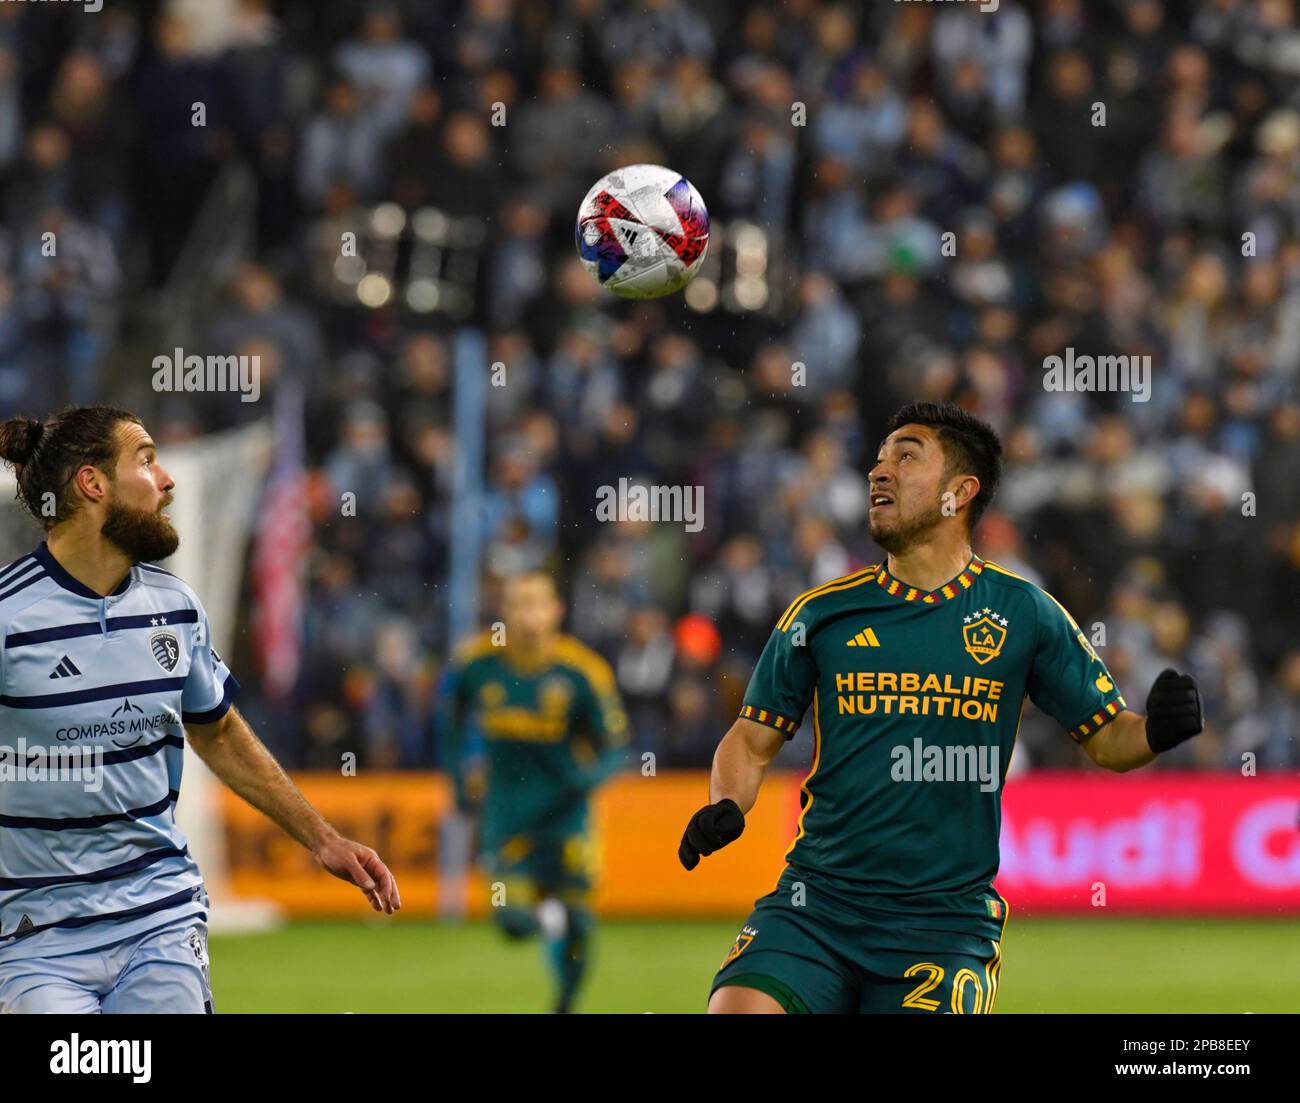 Kansas City, USA. 16th Nov, 2022. Los Angeles Galaxy midfielder Memo Rodríguez (20, right) and Sporting Kansas City midfielder Graham Zusi (8) watch the ball drop. Sporting KC hosted the LA Galaxy in a Major League Soccer game on March 11, 2023 at Children's Mercy Park Stadium in Kansas City, KS, USA. Photo by Tim Vizer/Sipa USA Credit: Sipa USA/Alamy Live News Stock Photo